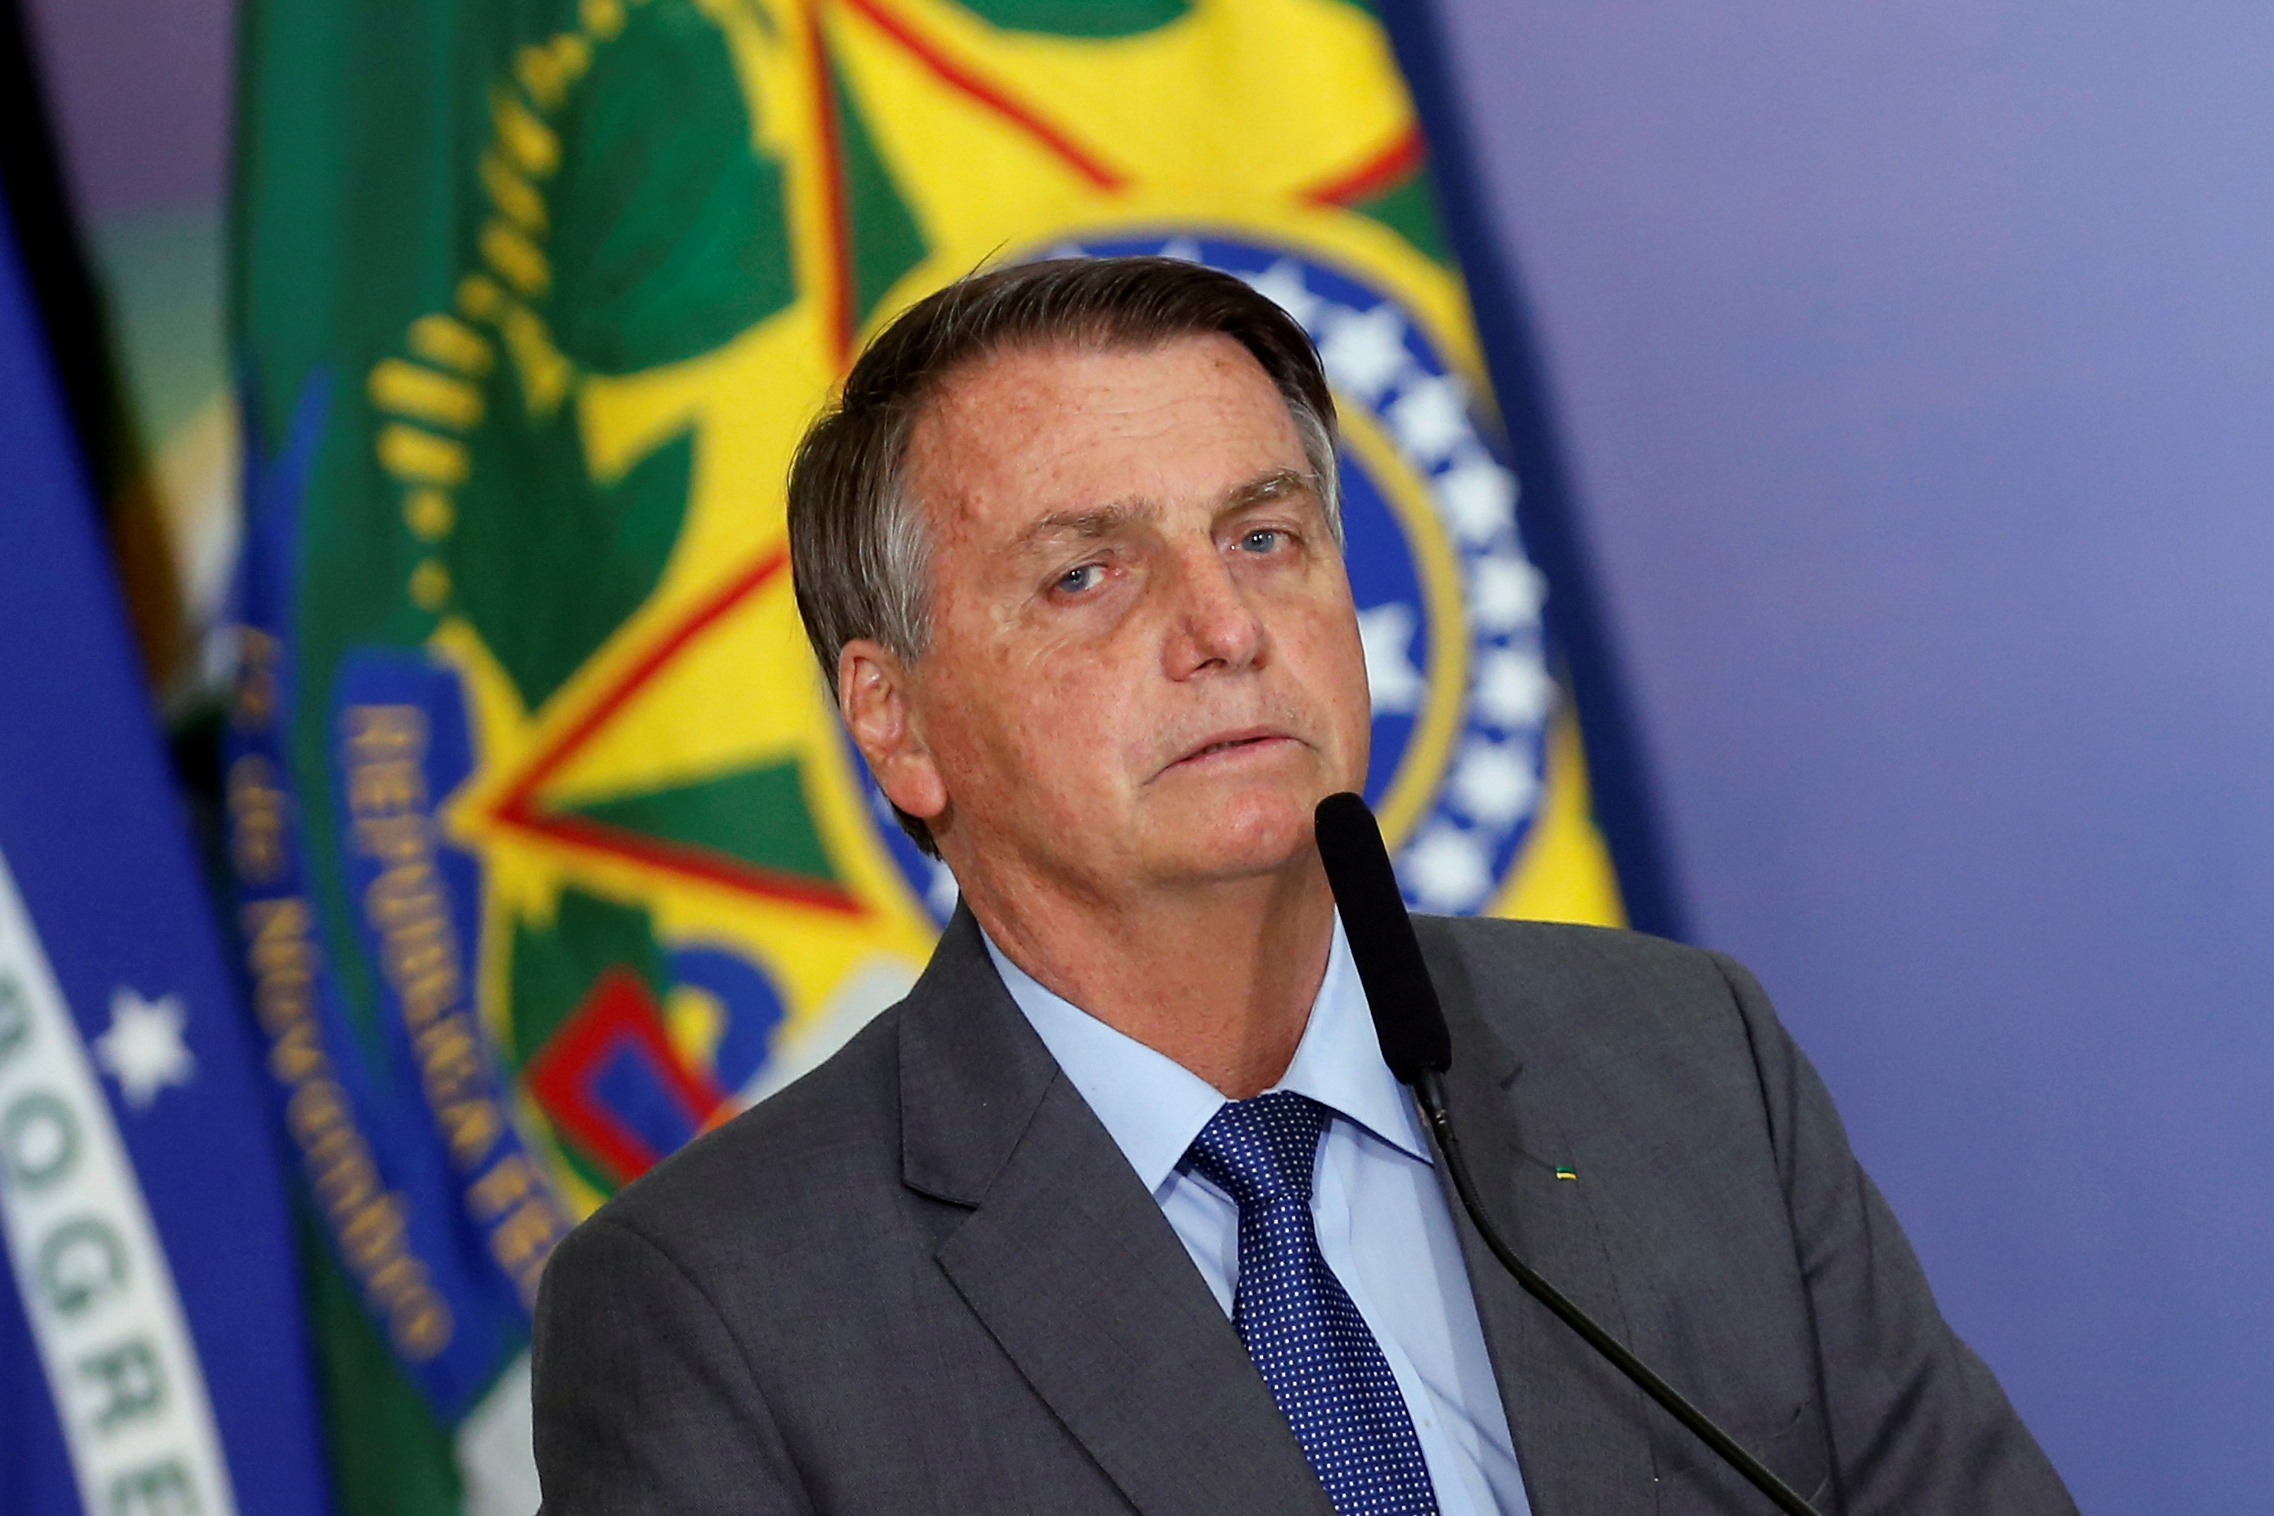 Brazil's President Jair Bolsonaro talks during a ceremony of signing a decree establishing the Public Integrity System of the Federal government at the Planalto Palace in Brasilia, Brazil July 27, 2021. REUTERS/Adriano Machado